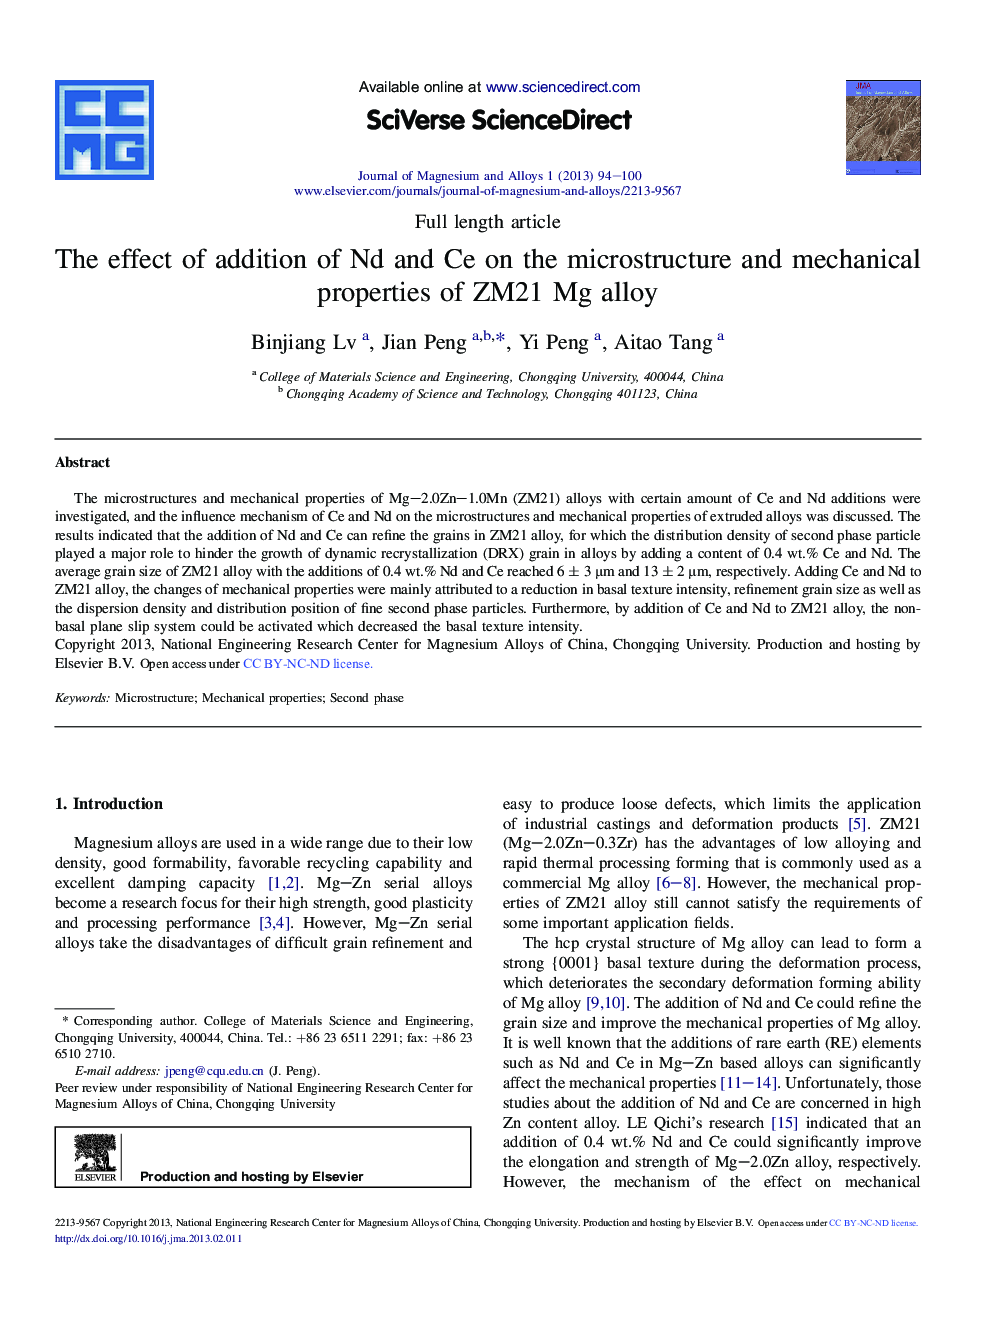 The effect of addition of Nd and Ce on the microstructure and mechanical properties of ZM21 Mg alloy 